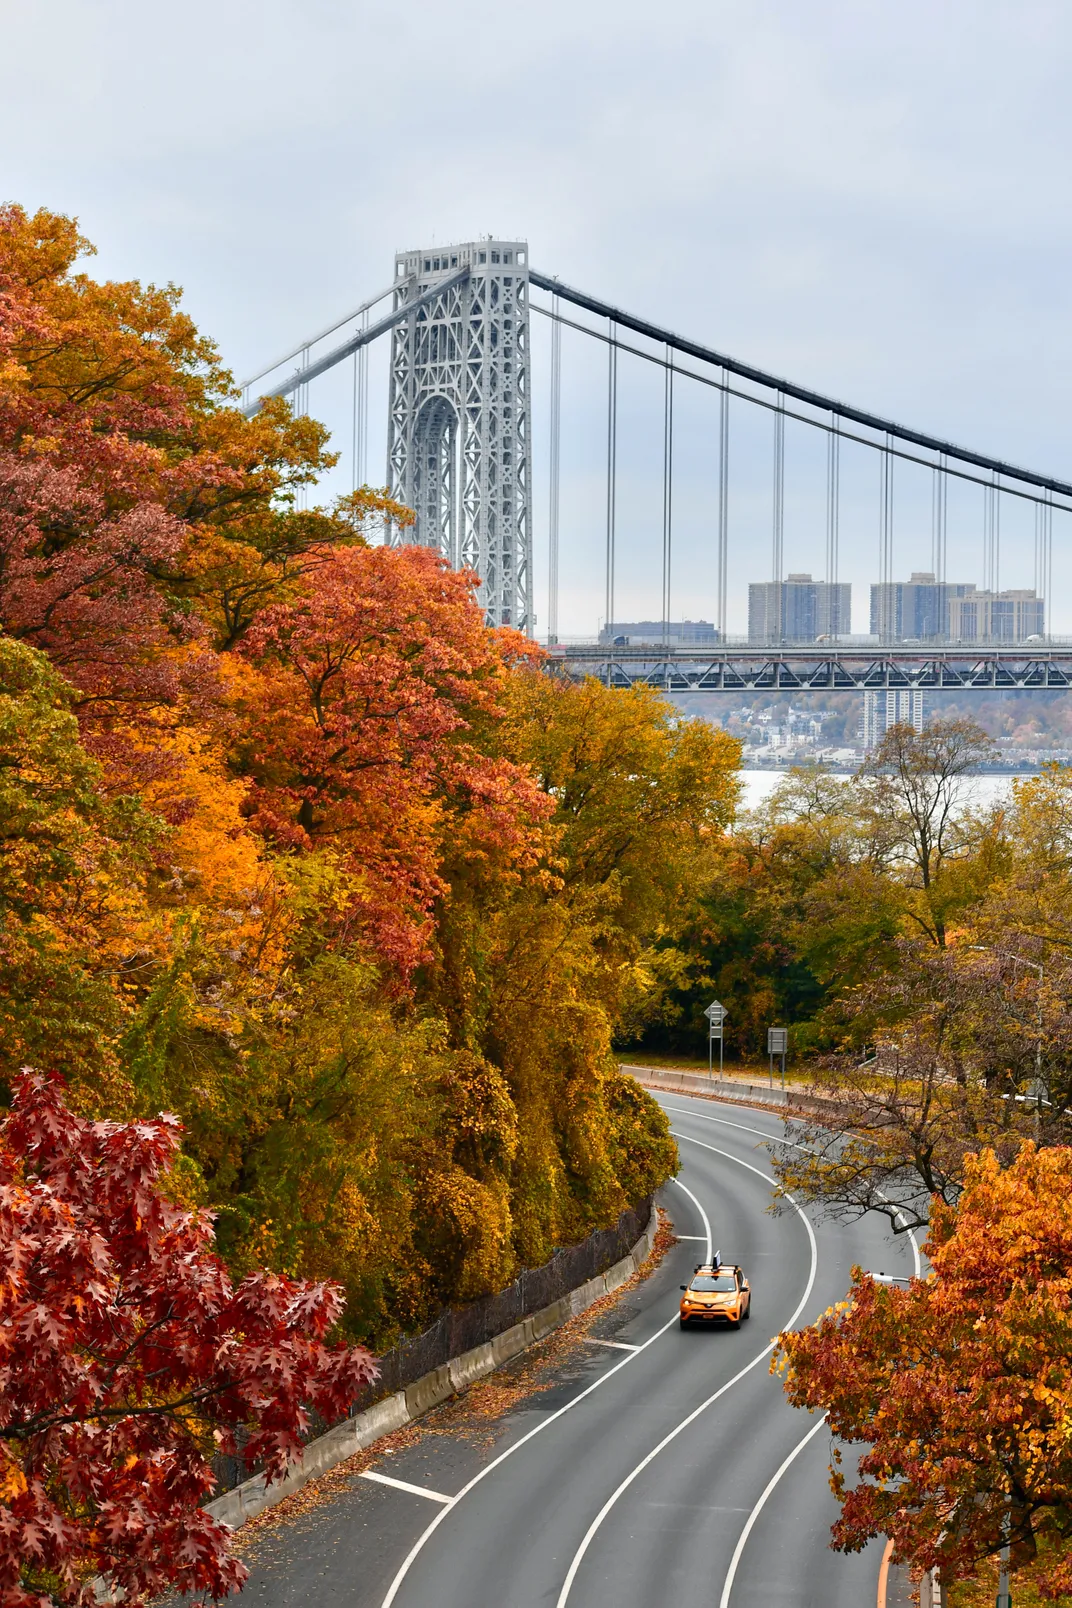 3 - Few things say “New York” as definitively as the George Washington Bridge over the Hudson River or the city’s iconic yellow cabs—and, in autumn, the turning leaves make them both more picturesque.